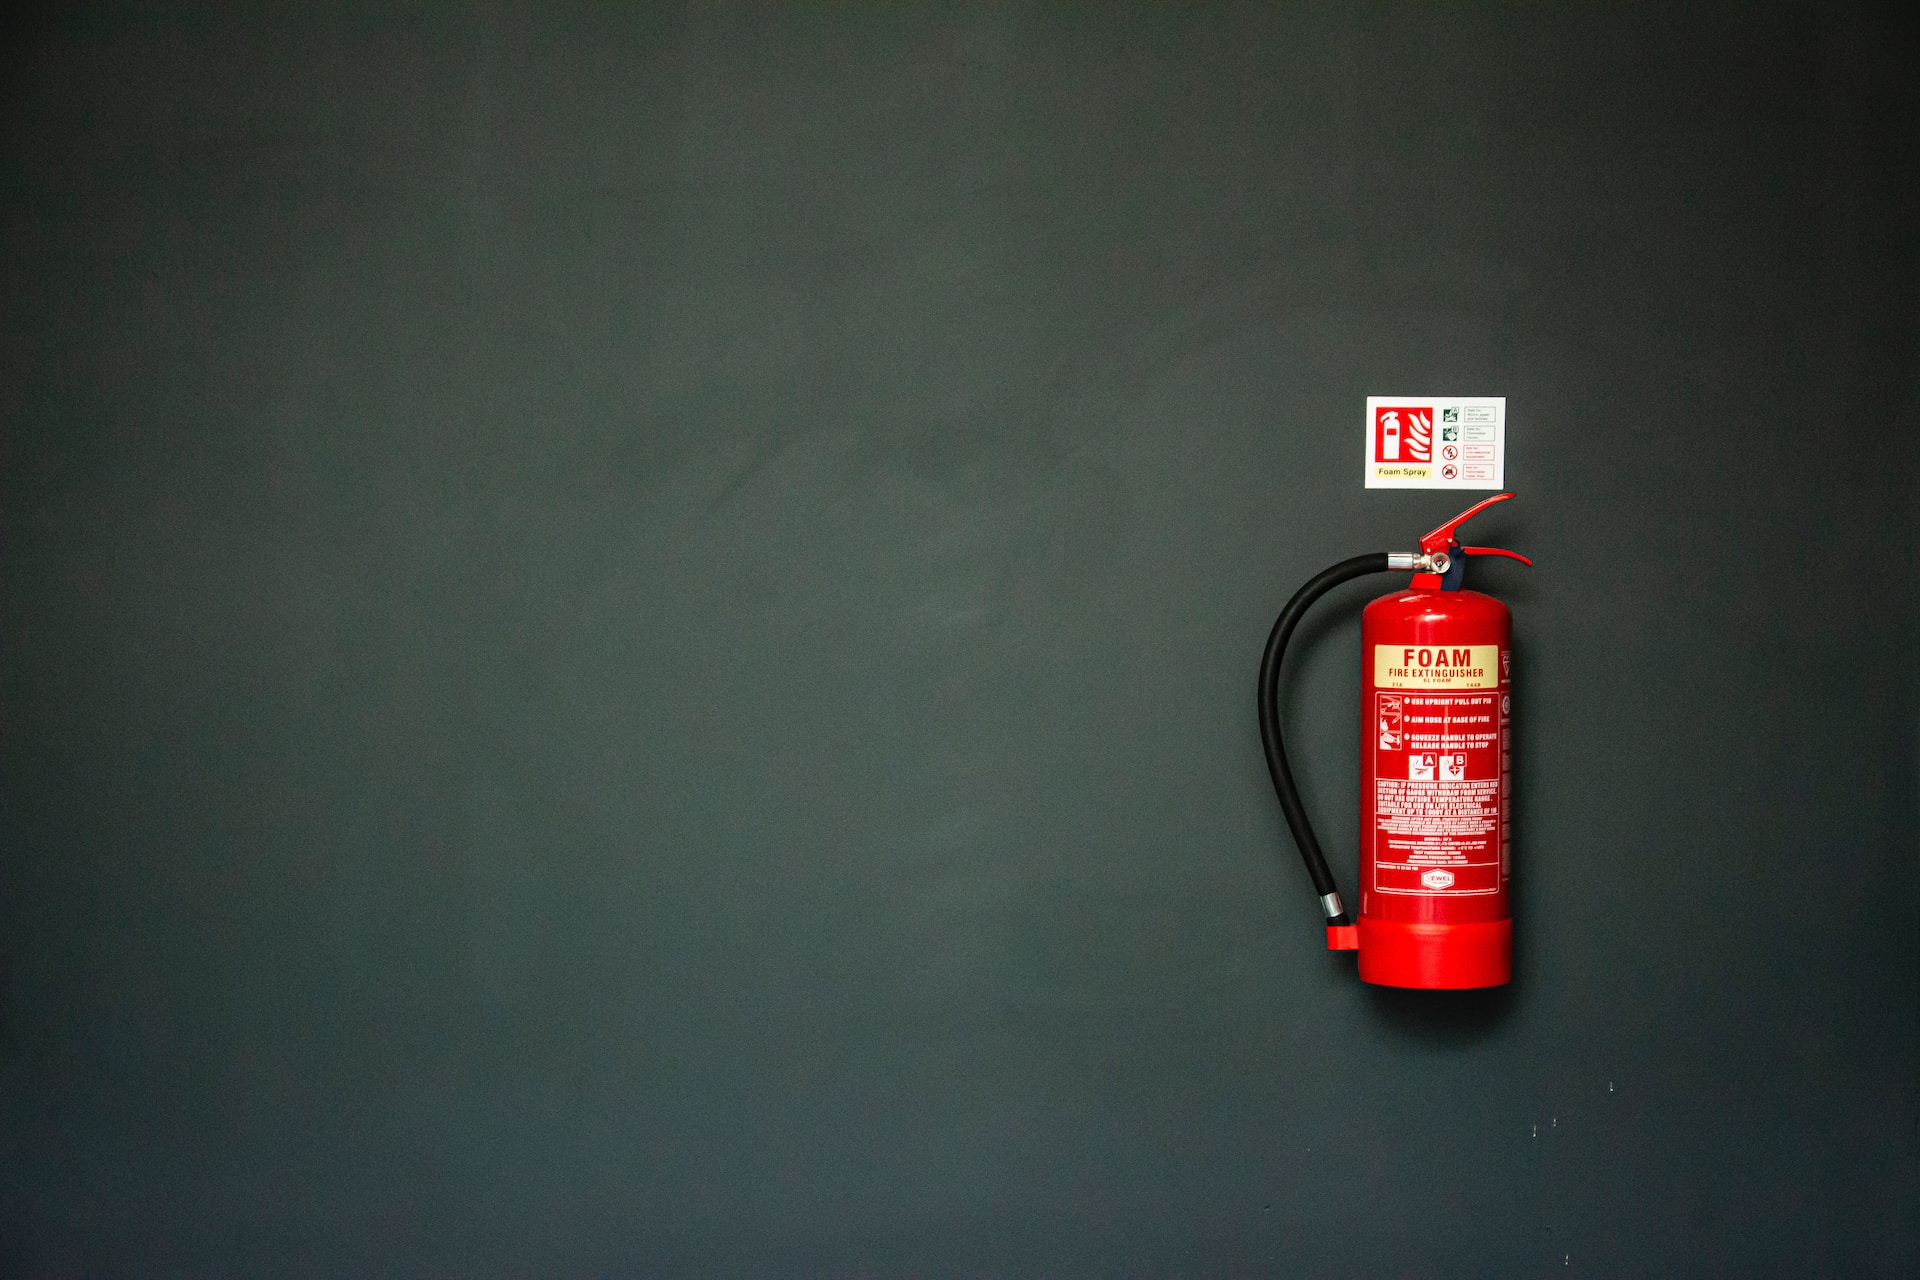 A fire extinguisher on the wall